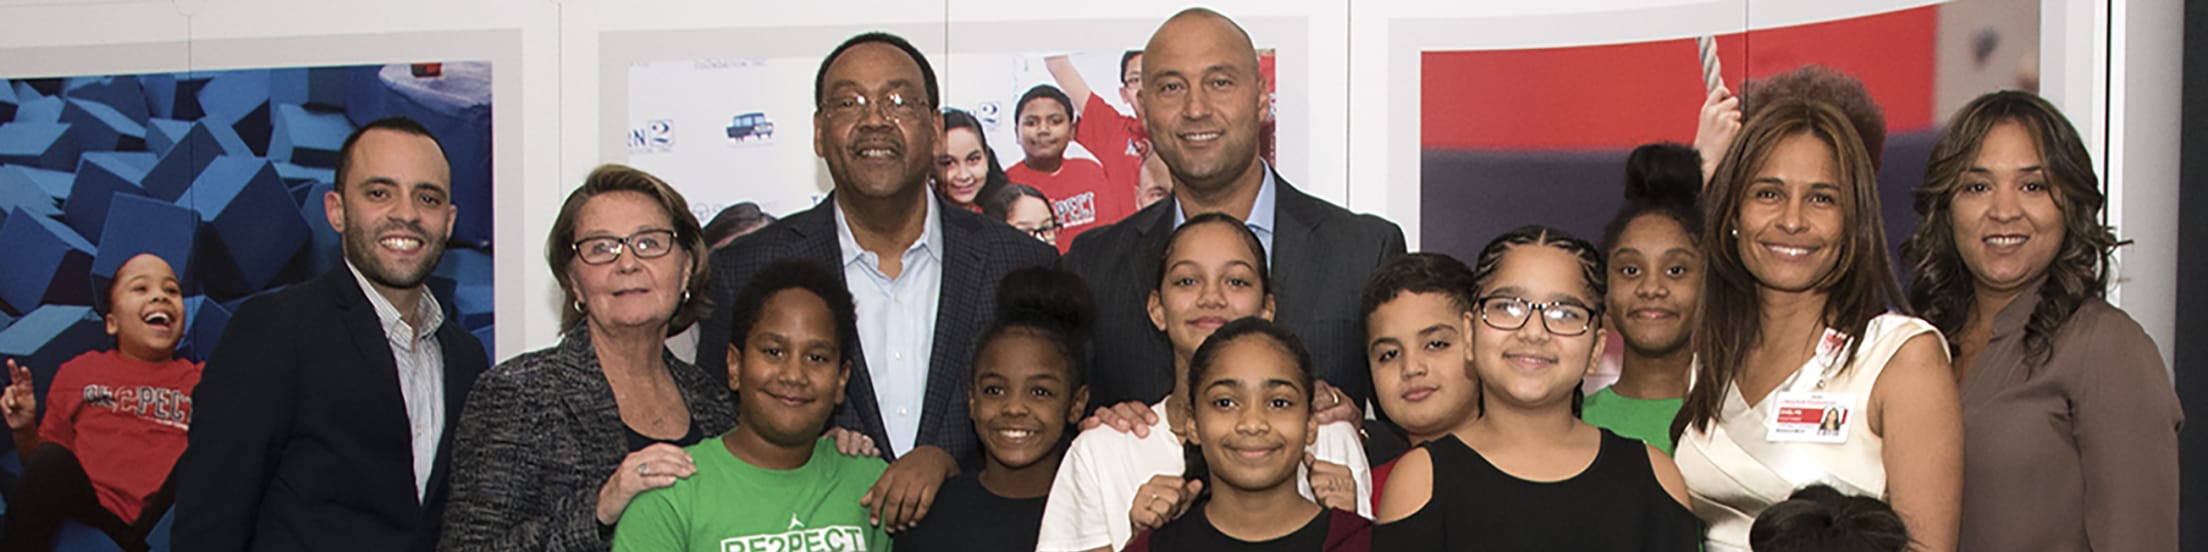 Derek Jeter's Turn 2 Foundation Benefits From Kids Rock Fashion Show - Look  to the Stars